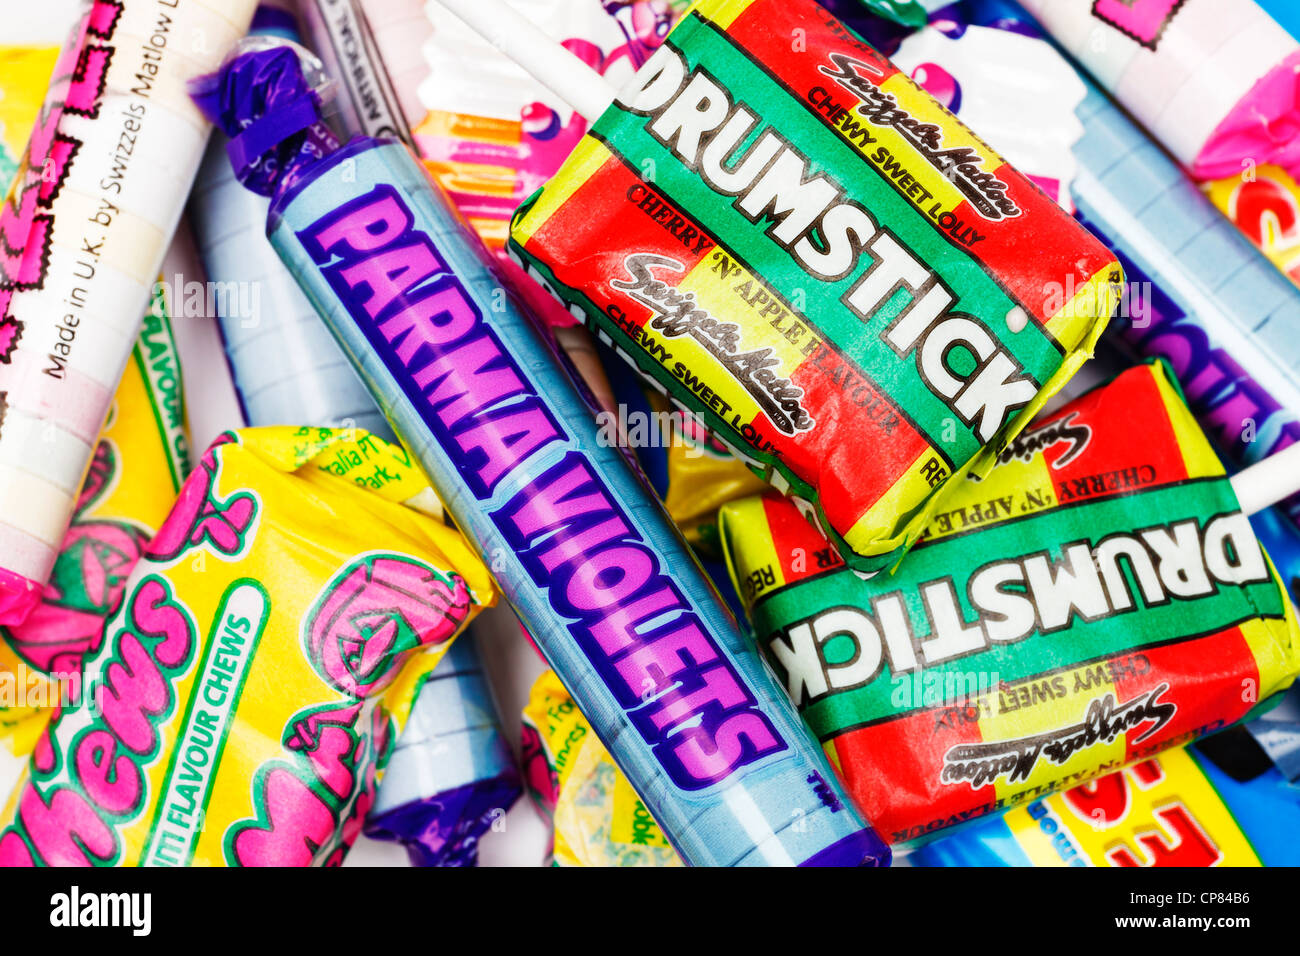 Pile of old fashioned retro sweets / candy 1970s 1980s UK Stock Photo